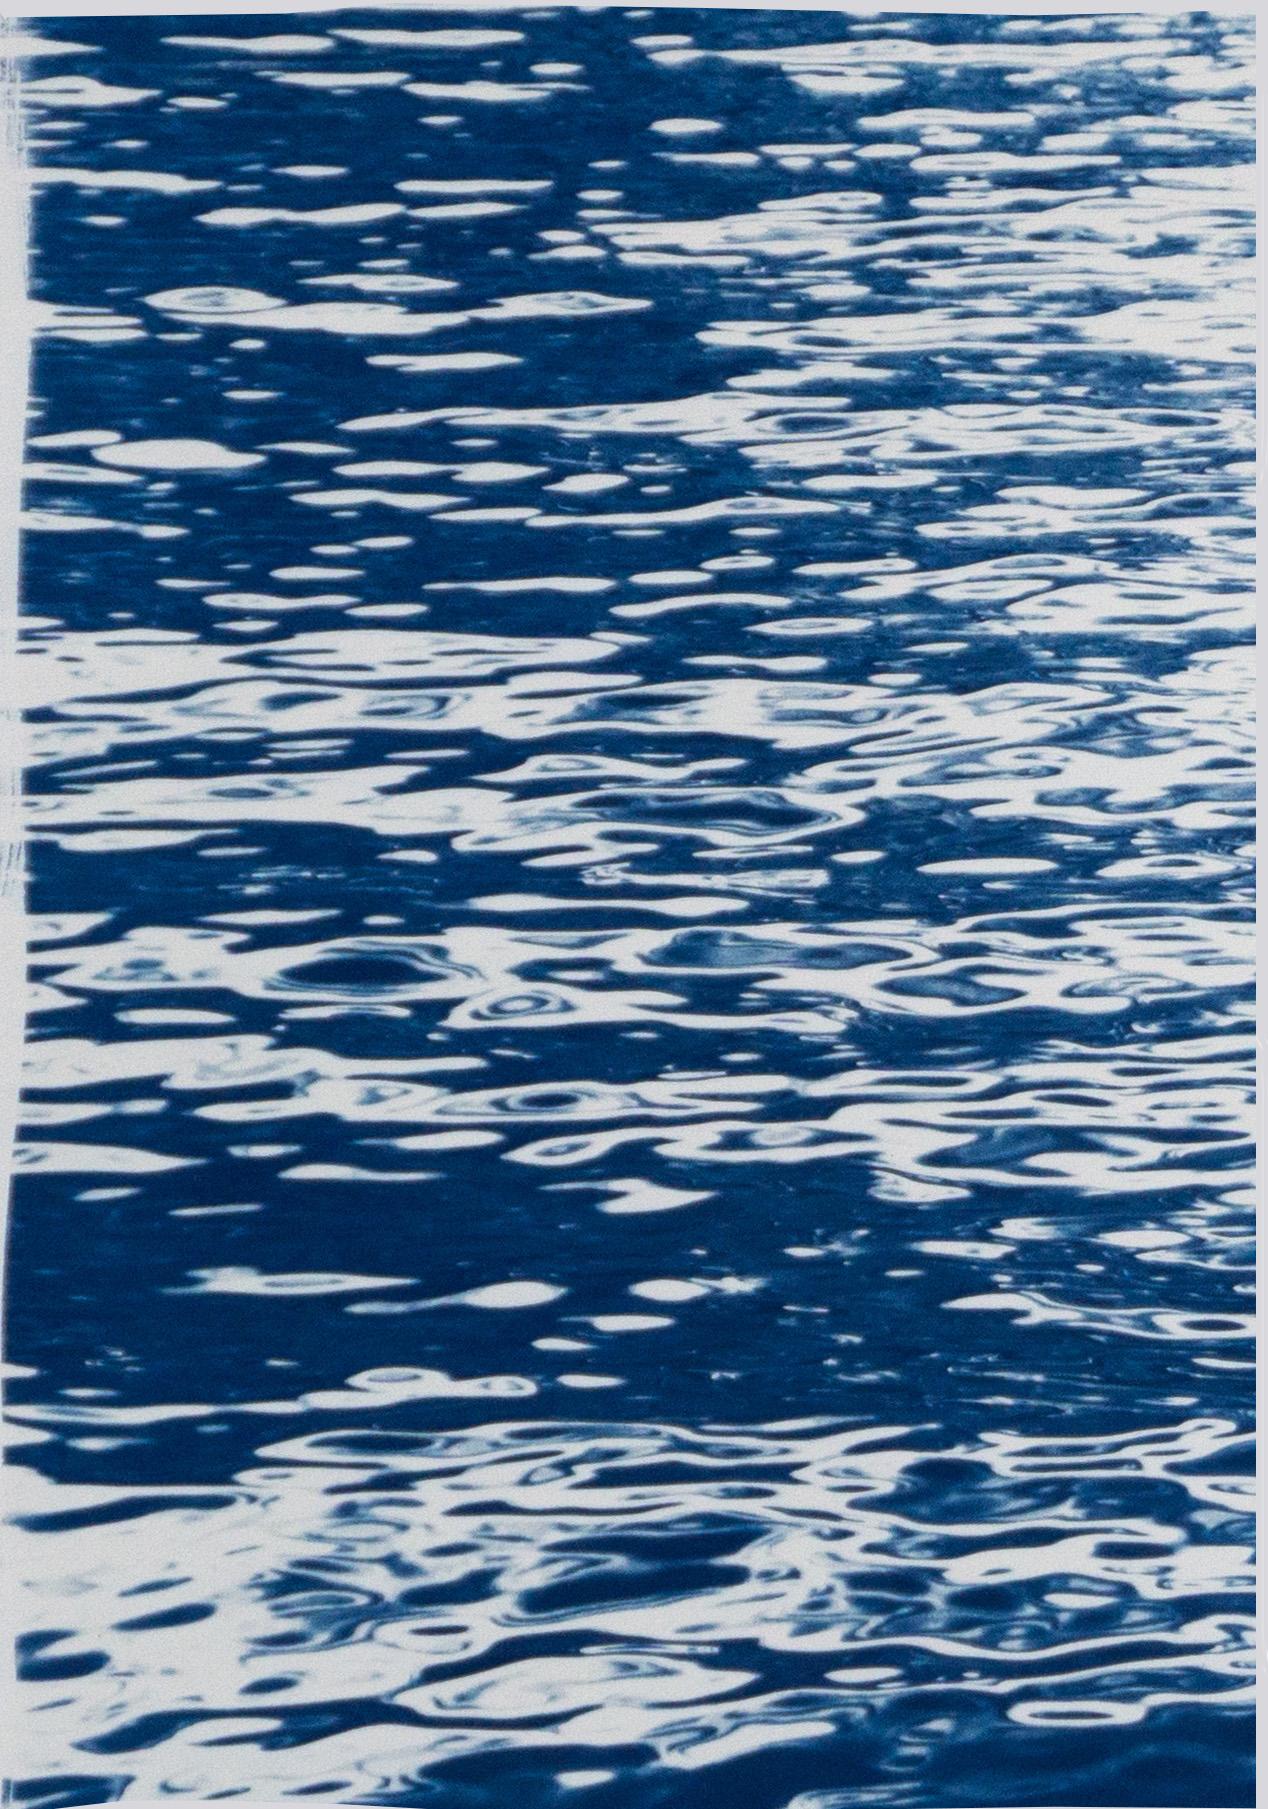 Moonlight Ripples over Lake Como, Nautical Cyanotype Triptych of Moving Water - Contemporary Print by Kind of Cyan